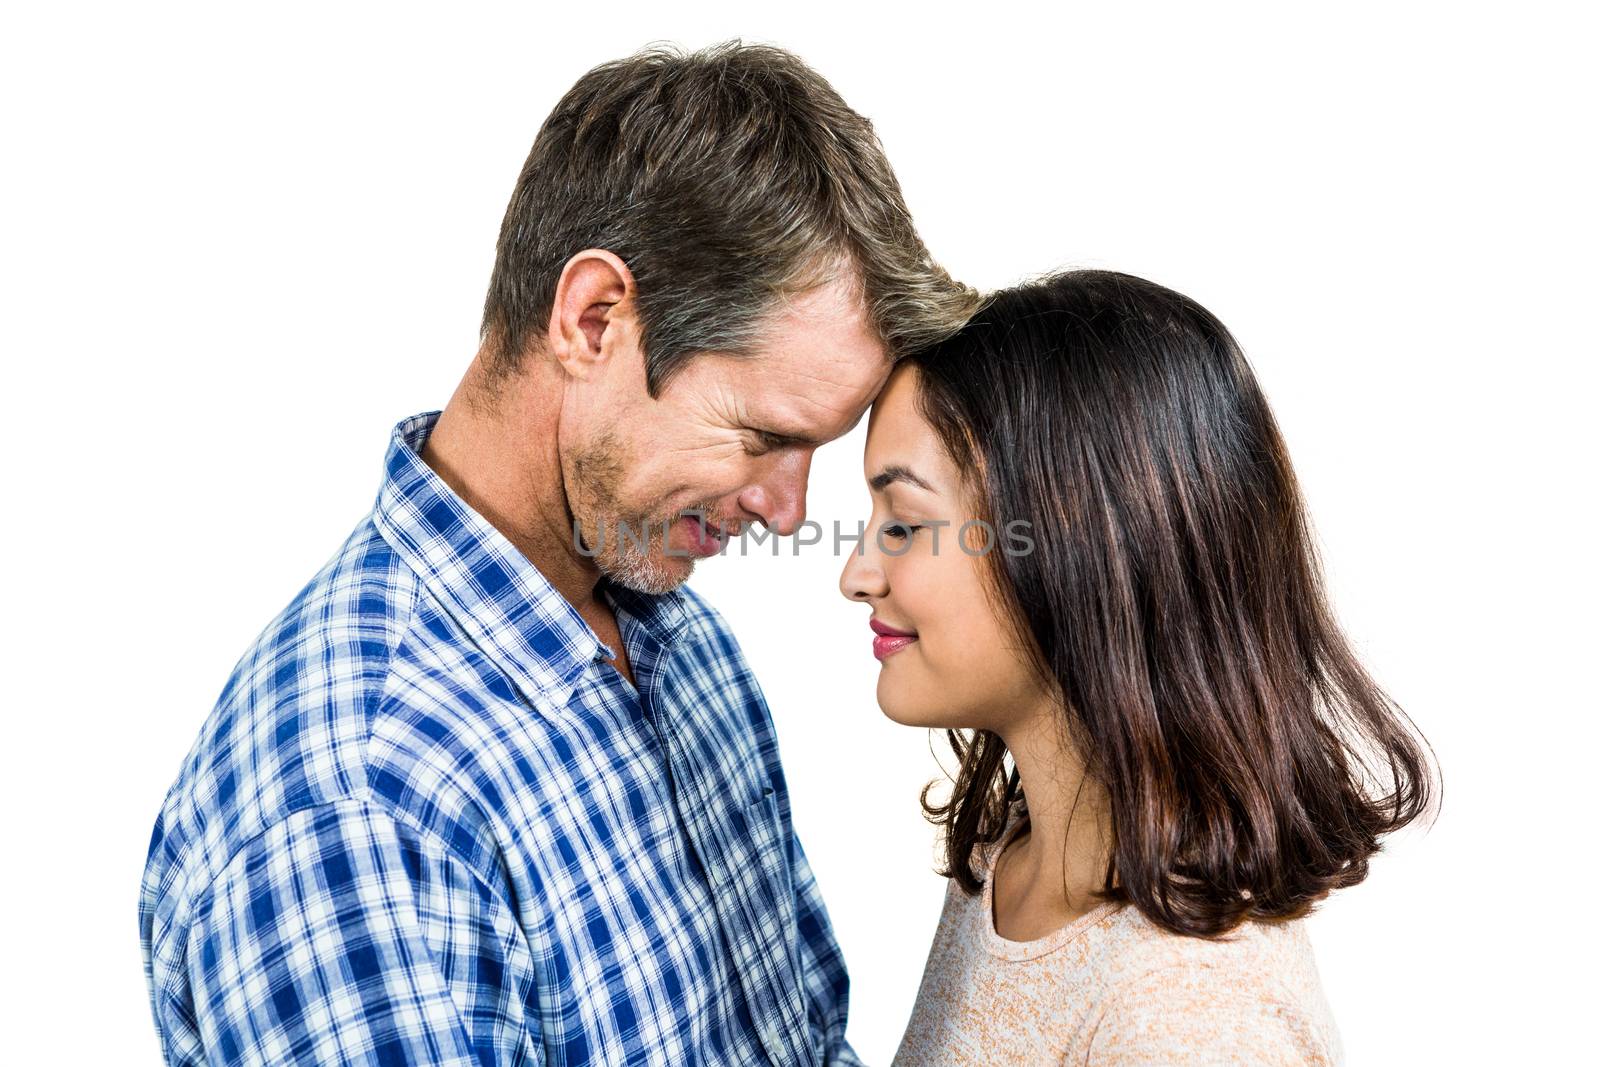 Close-up of romantic couple standing face to face against white background